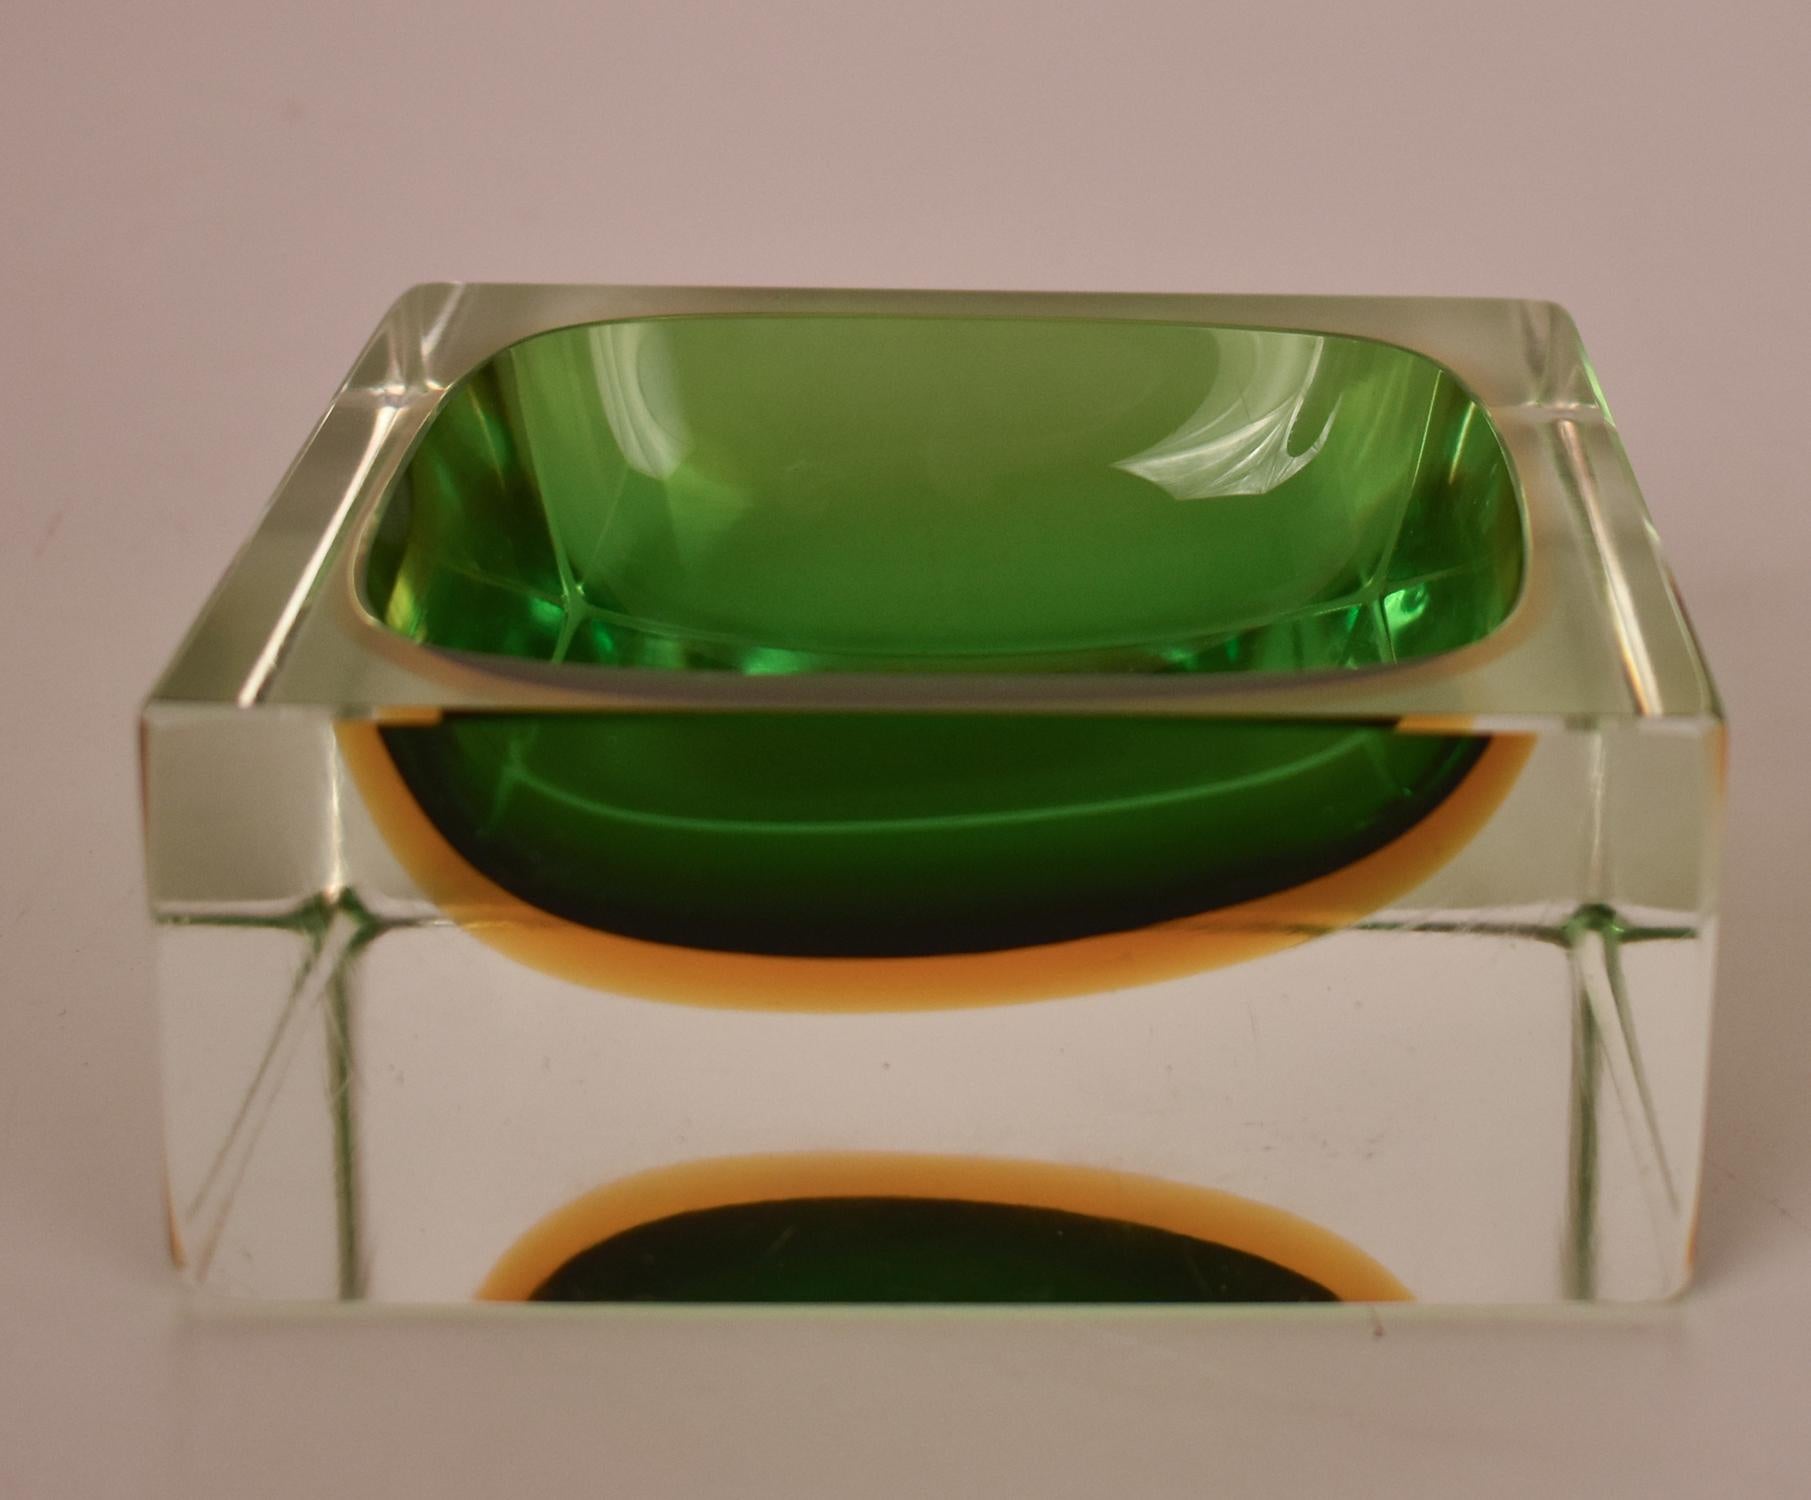  Large Murano Green Glass Sommerso Bowl  Flavio Poli, Italy, 1970s.
Attributed to Flavio Poli.
With the Sommerso technique. Green, yellow and transparent colors.
The combination of the three colors is fascinating.
Good condition.



